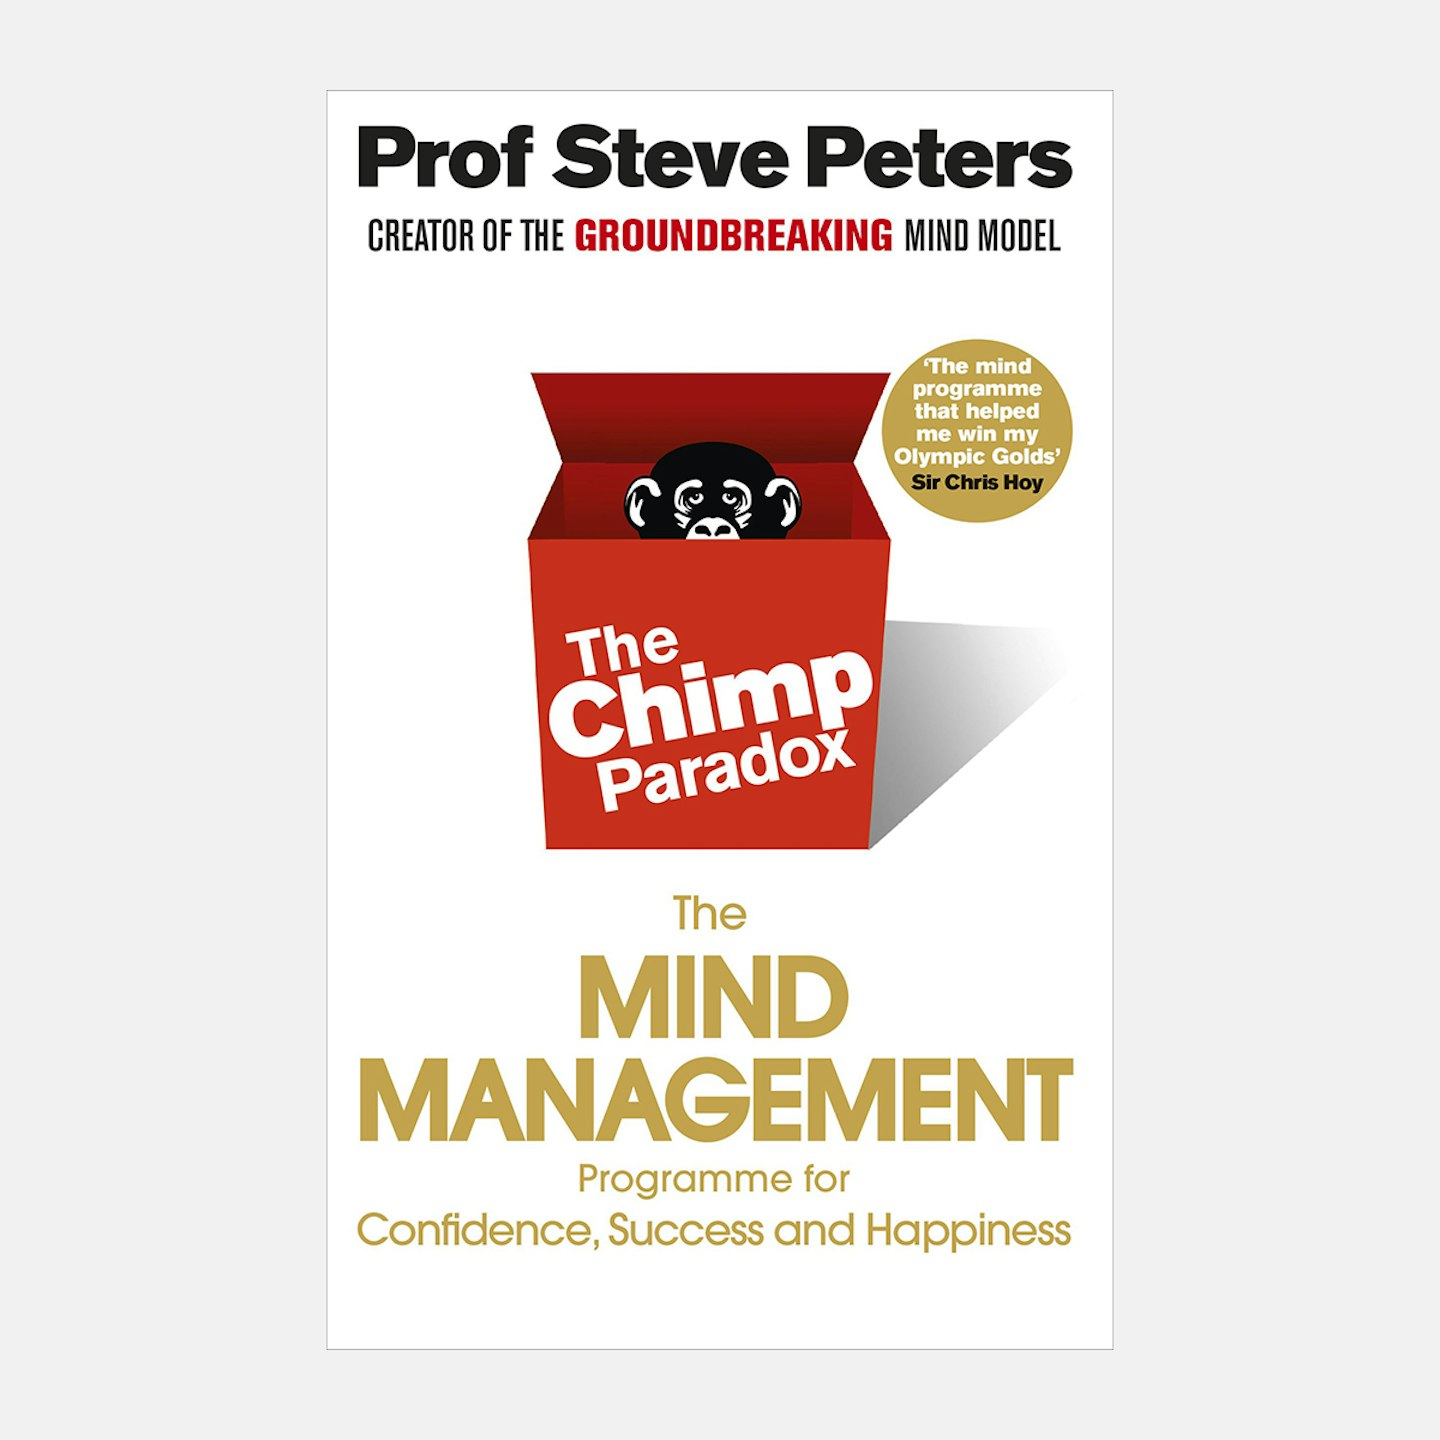 The Chimp Paradox: The Mind Management Programme to Help You Achieve Success, Confidence and Happiness